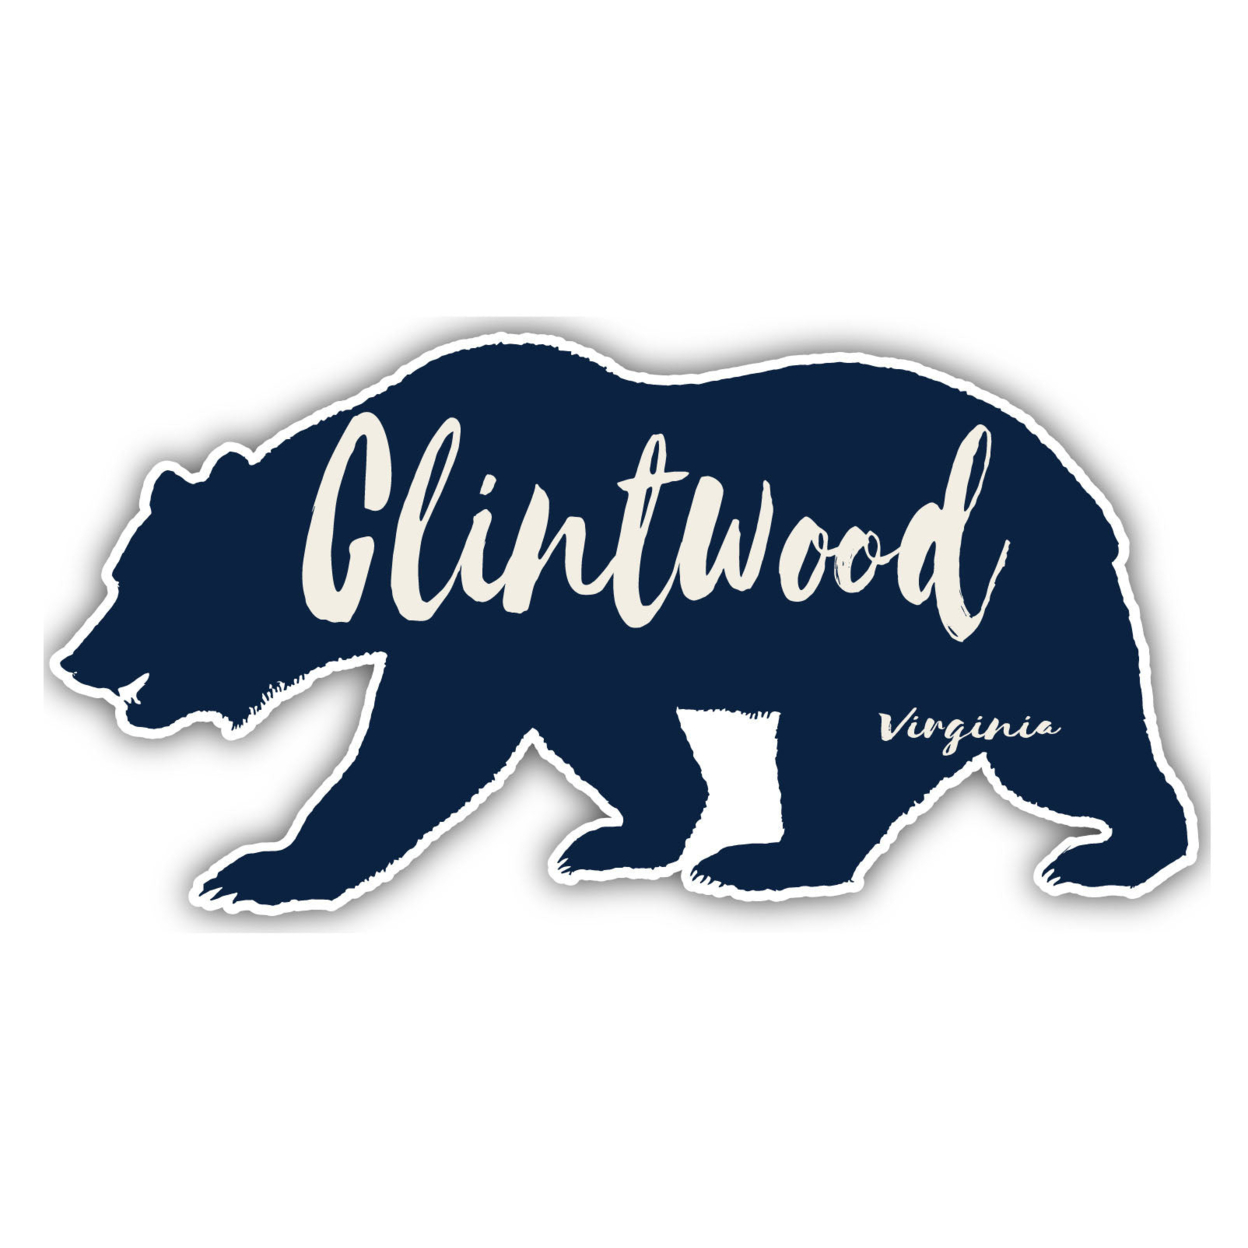 Clintwood Virginia Souvenir Decorative Stickers (Choose Theme And Size) - 4-Pack, 4-Inch, Bear